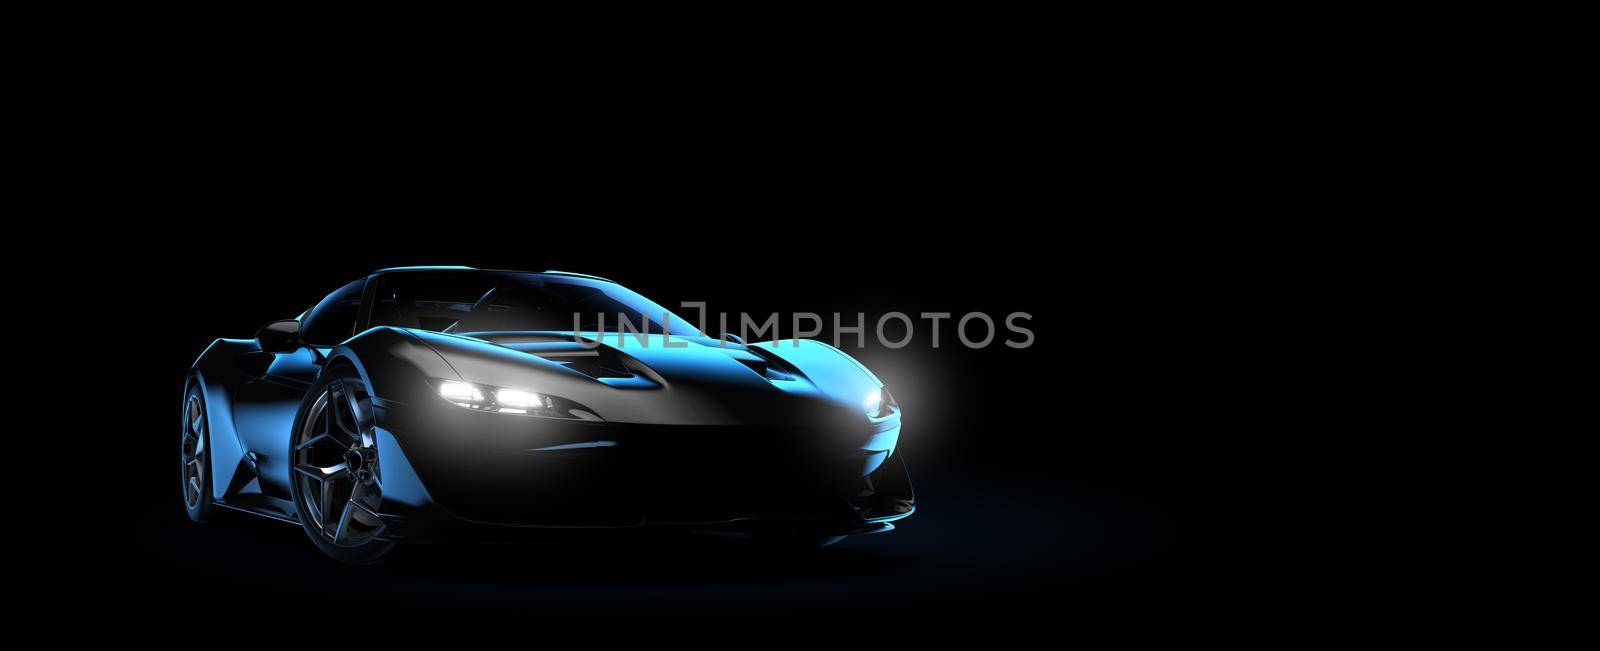 Generic and unbranded black sport car isolated on a dark background by cla78